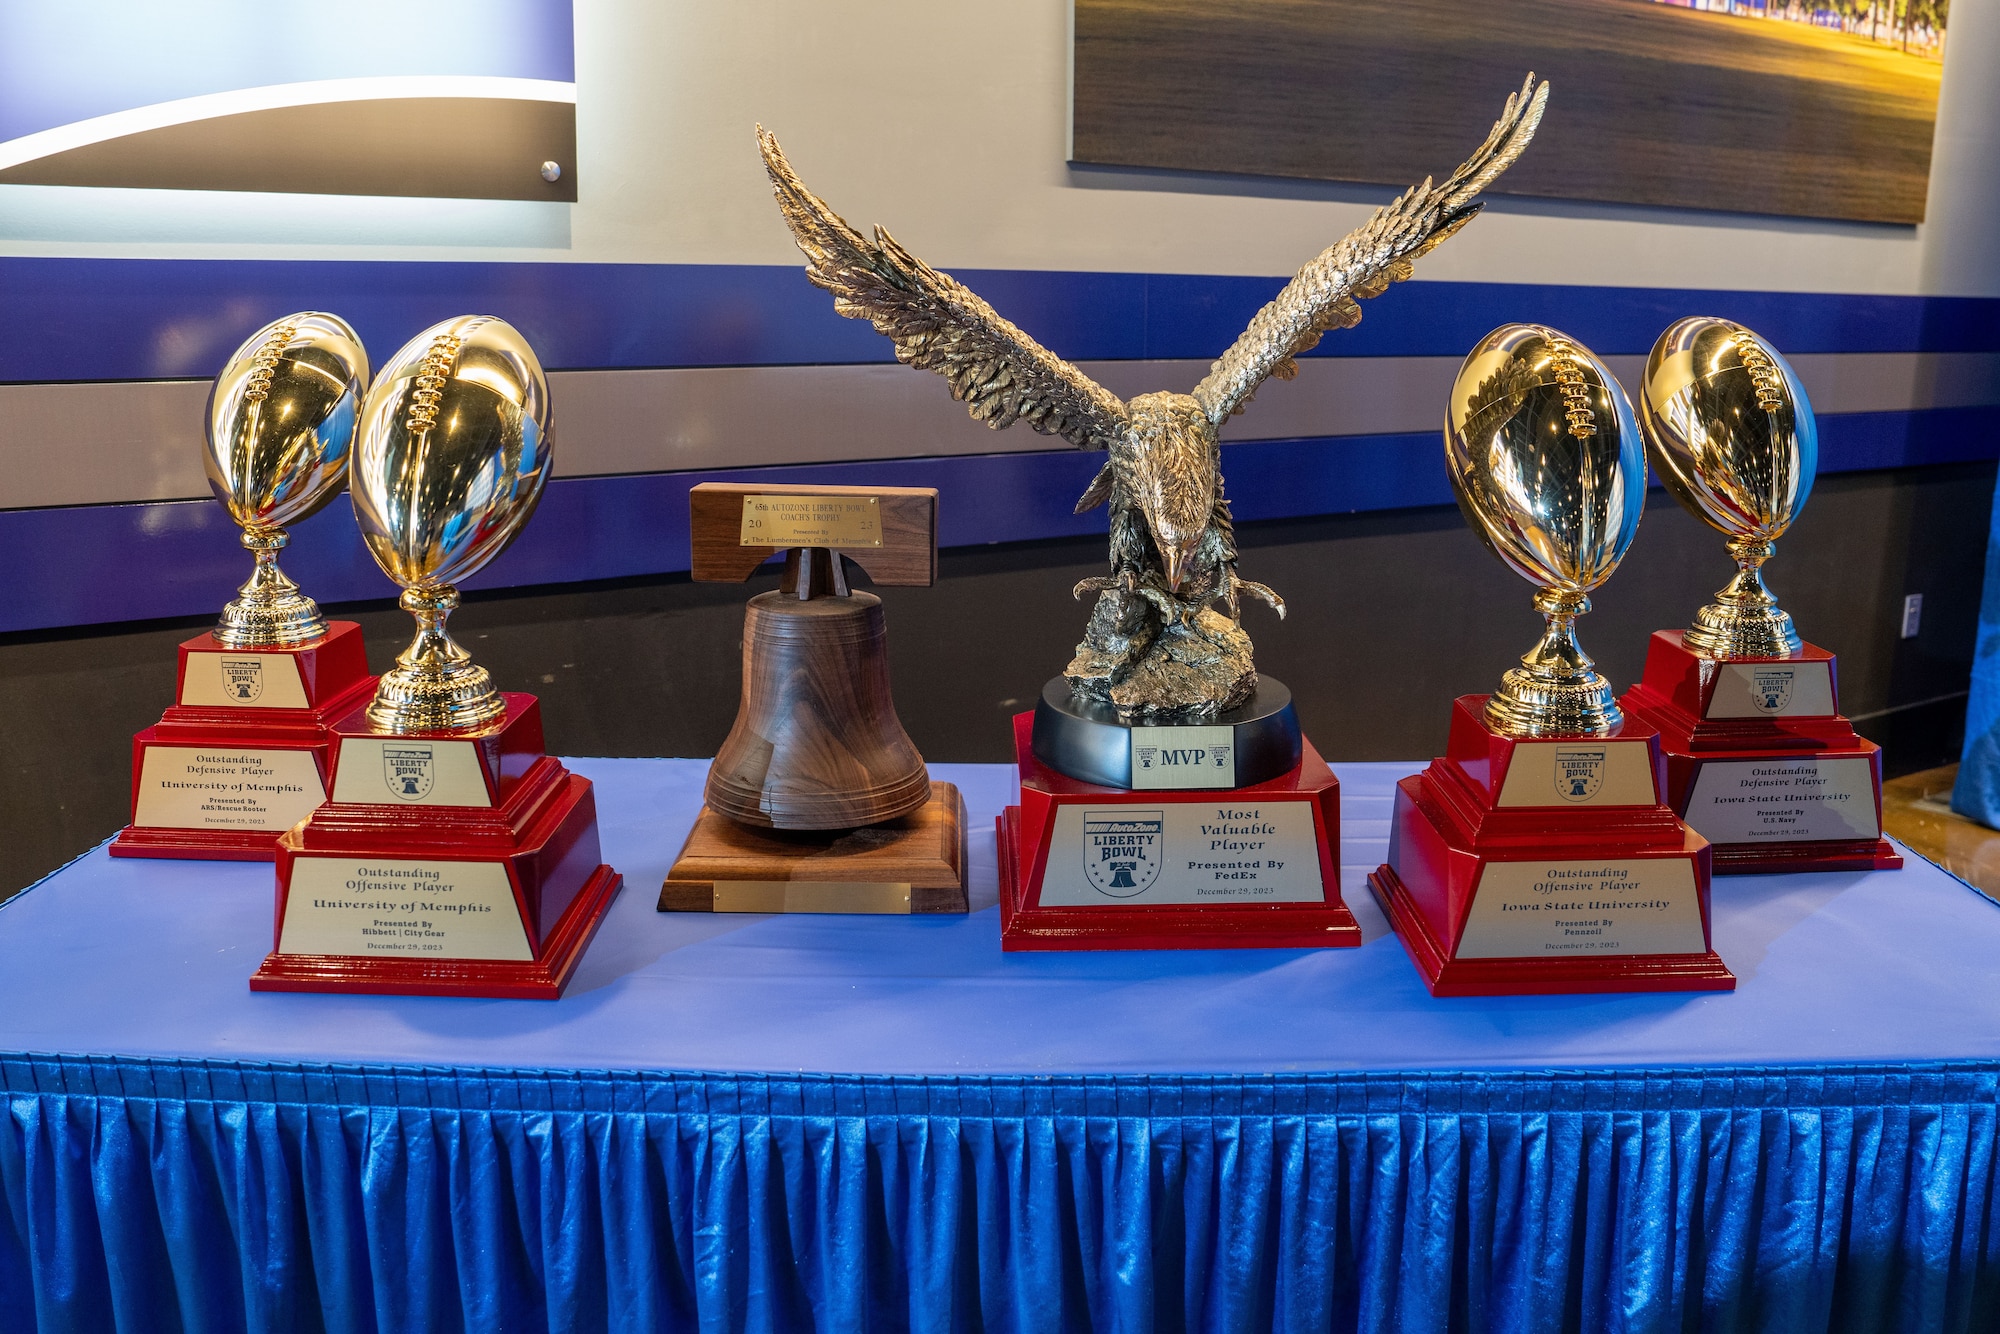 A close-up of the eagle trophy among other awards on a blue-clothed table. The trophies are labeled for various recognitions, such as MVP and Outstanding Player, with Liberty Bowl branding prominent in the background.